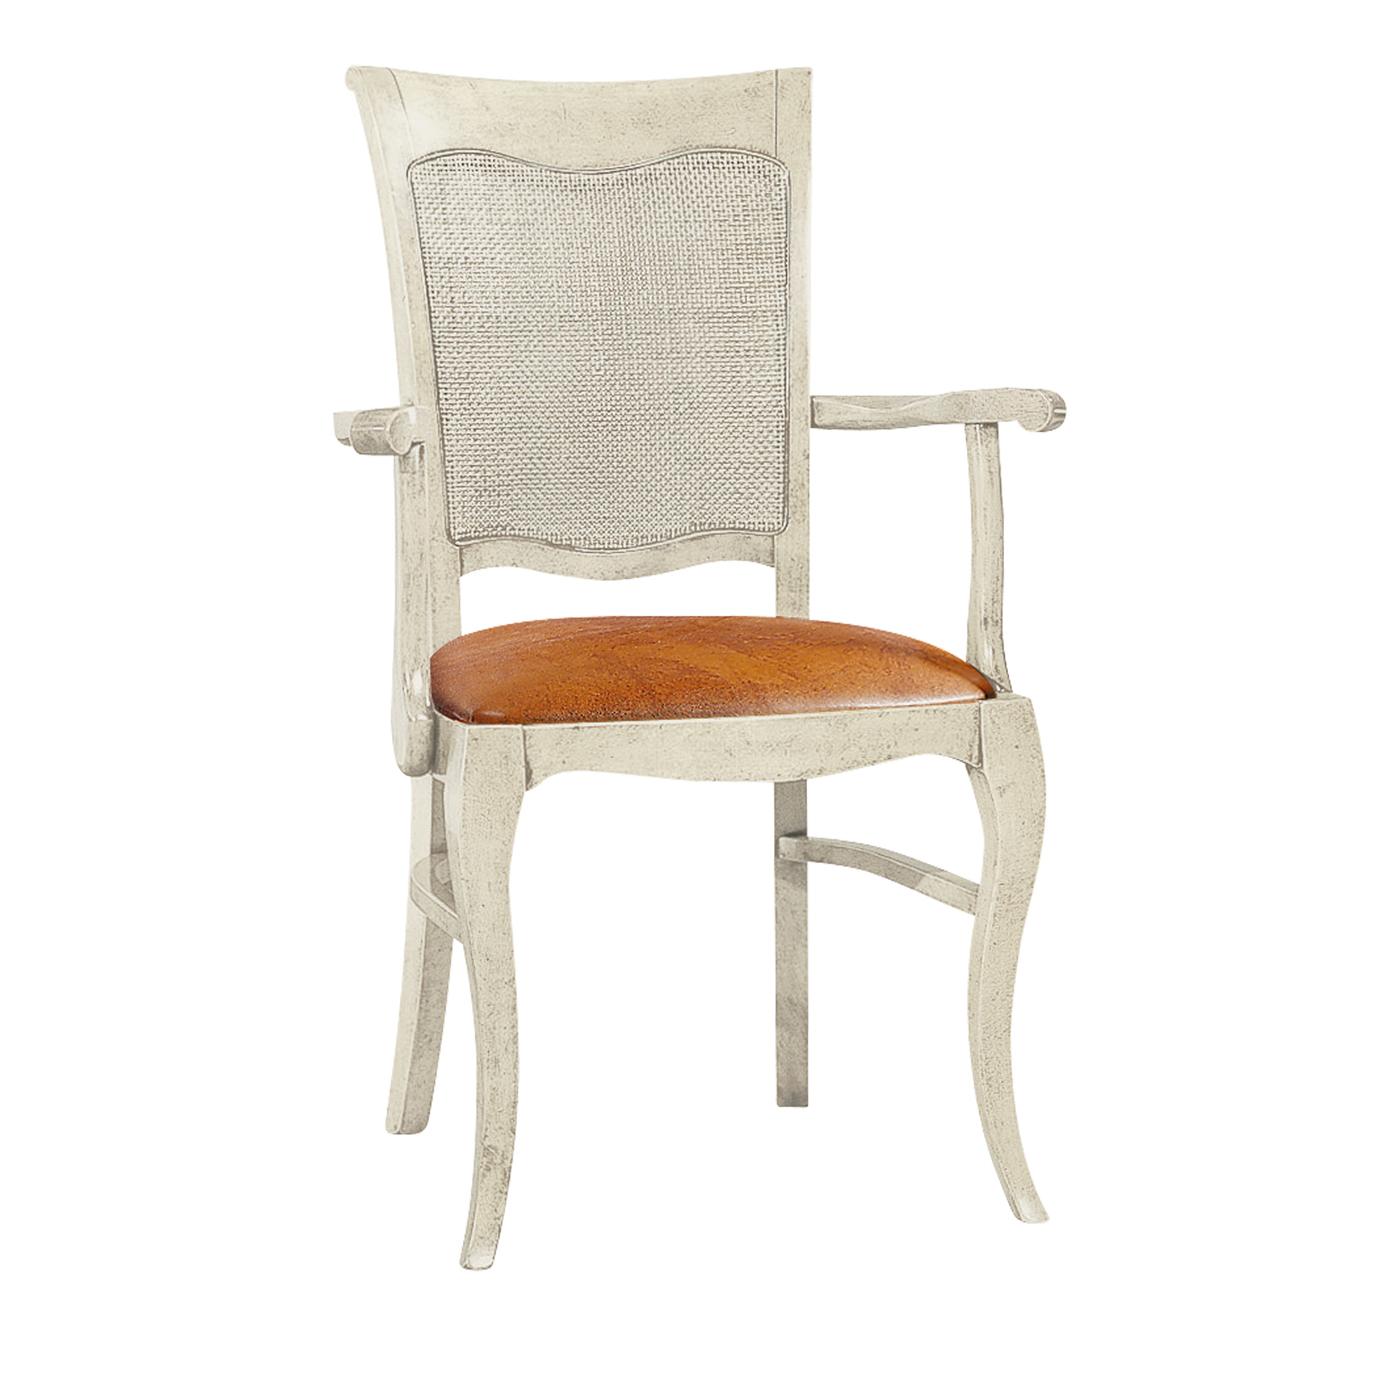 Dining chair with armrests, with a linear and elegant design, ideal to complete the decor of dining rooms. The structure is in wood with an antique ivory-white finish, the seat is padded and upholstered in fabric in warm orange tones. A perfect and